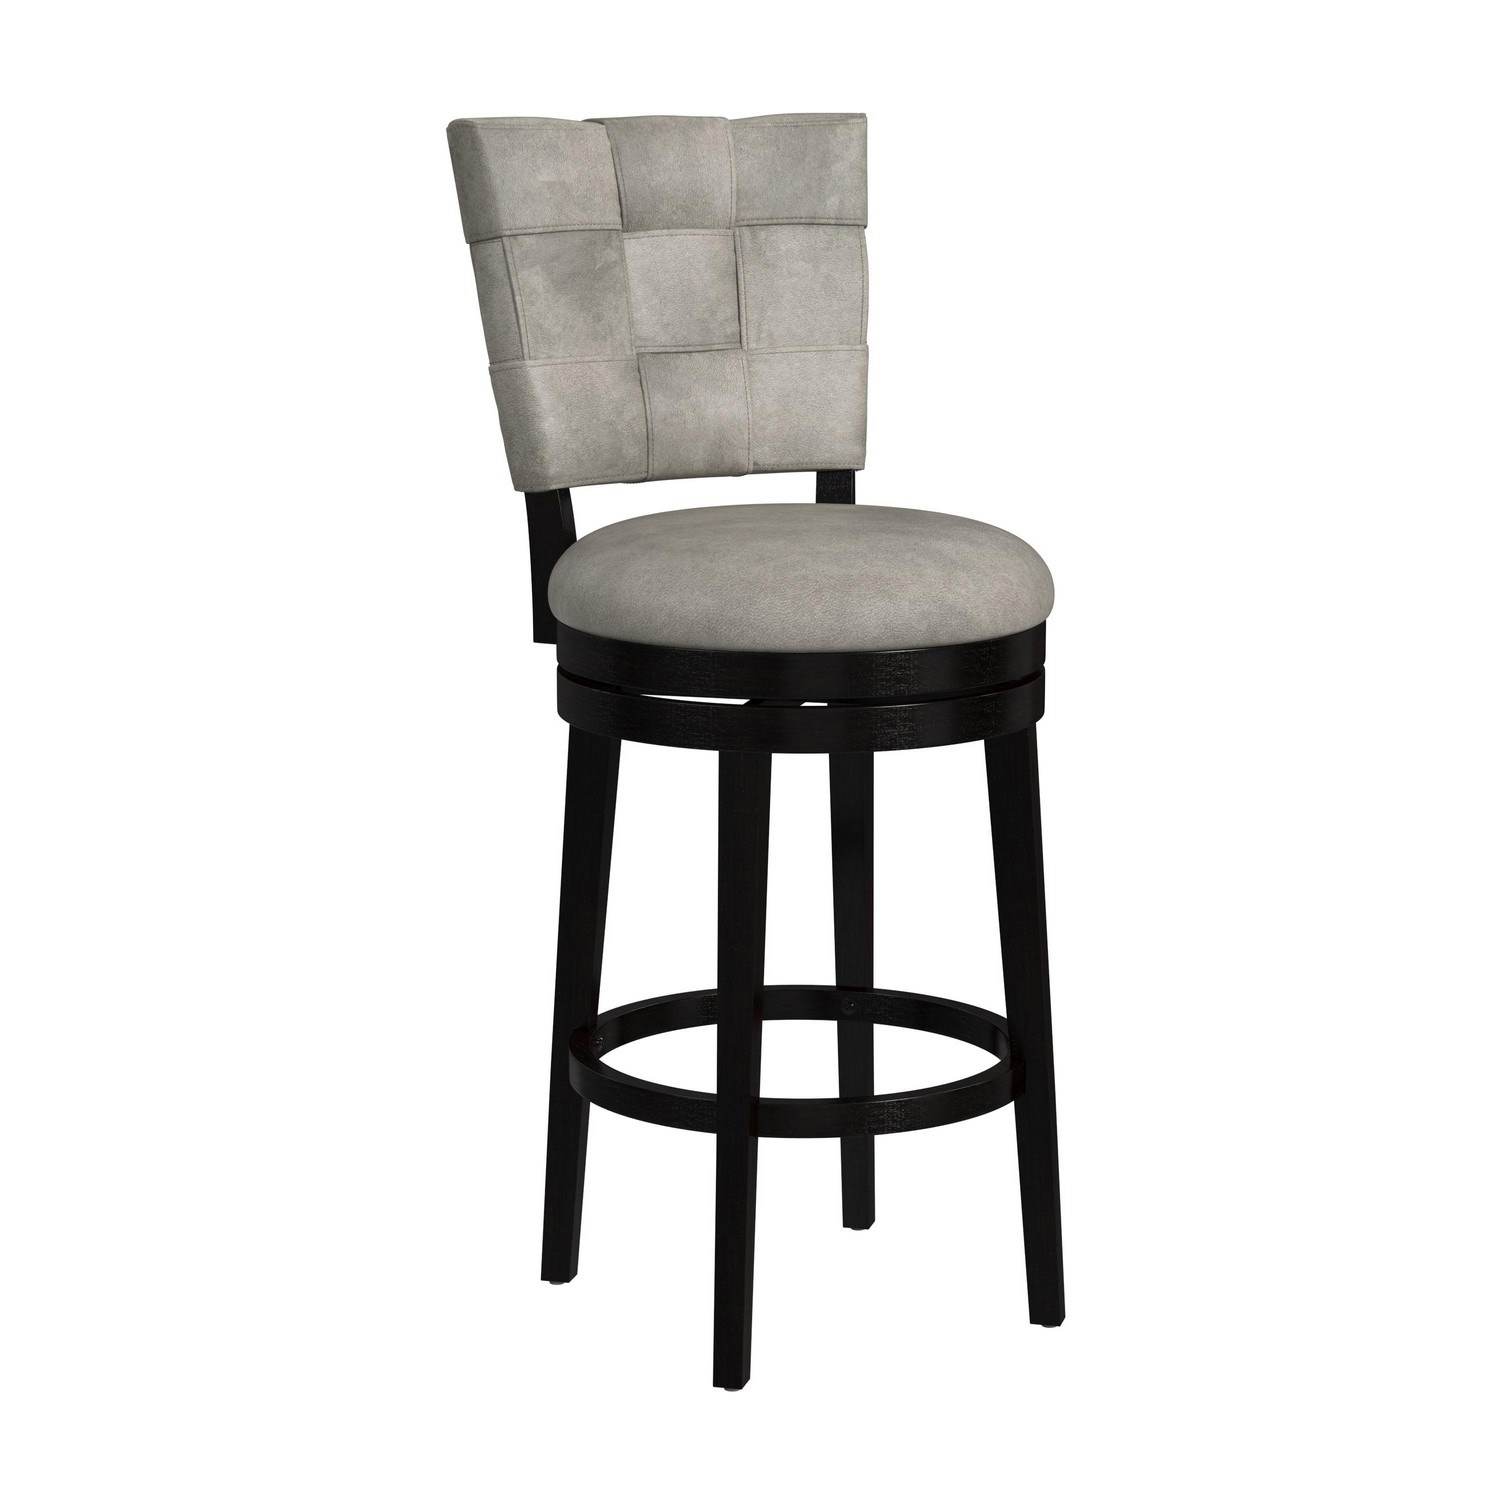 Hillsdale Kaede Wood and Upholstered Barr Height Swivel Stool - Black/Granite Gray Faux Leather